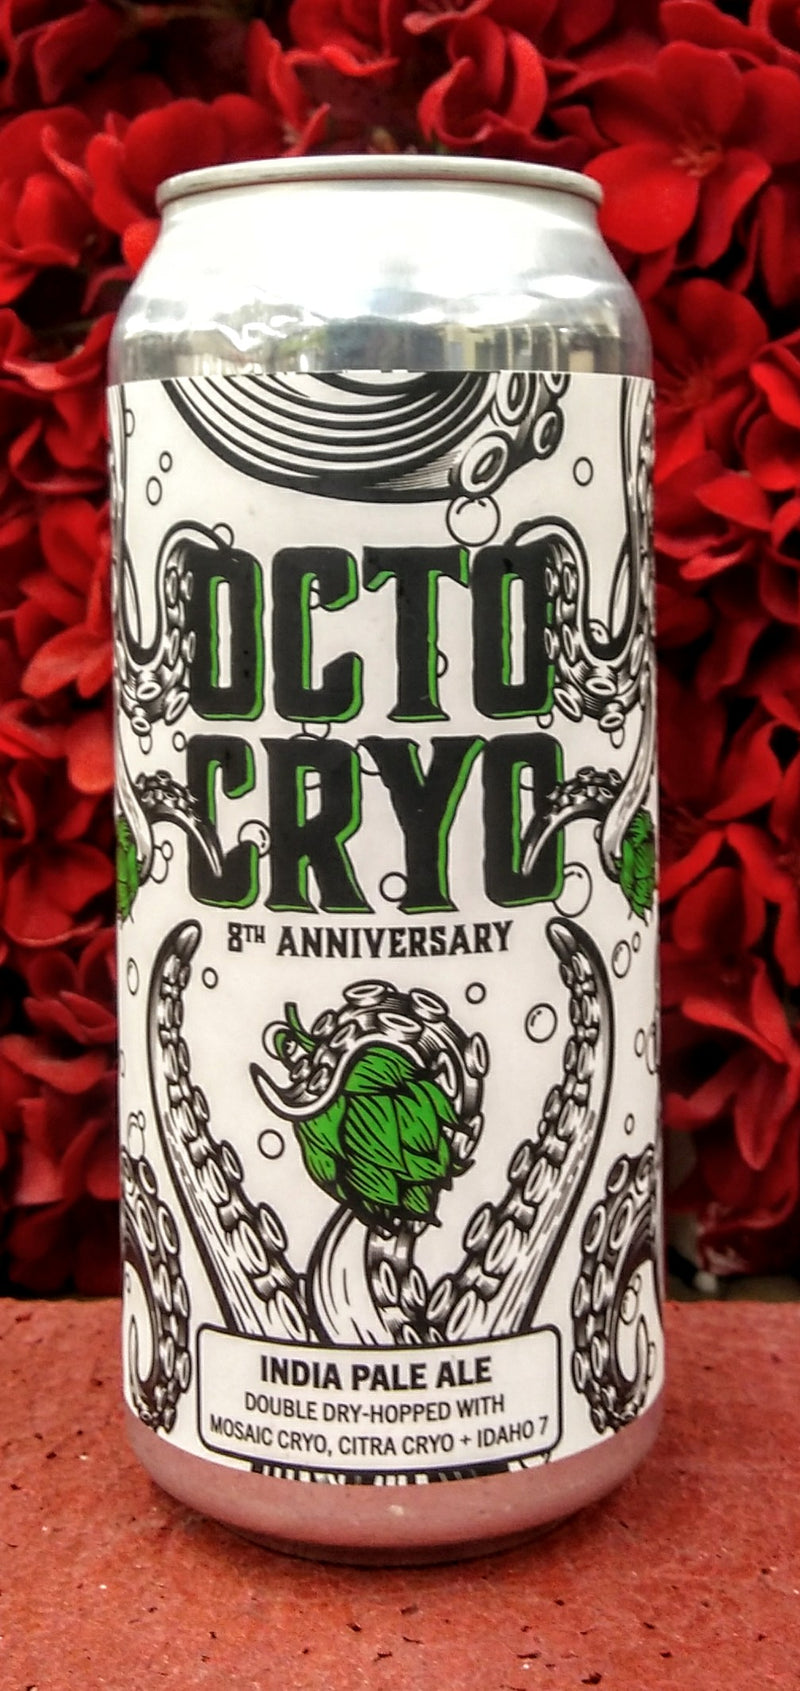 TRACK SEVEN BREWING CO. OCTO CRYO IPA 16oz can